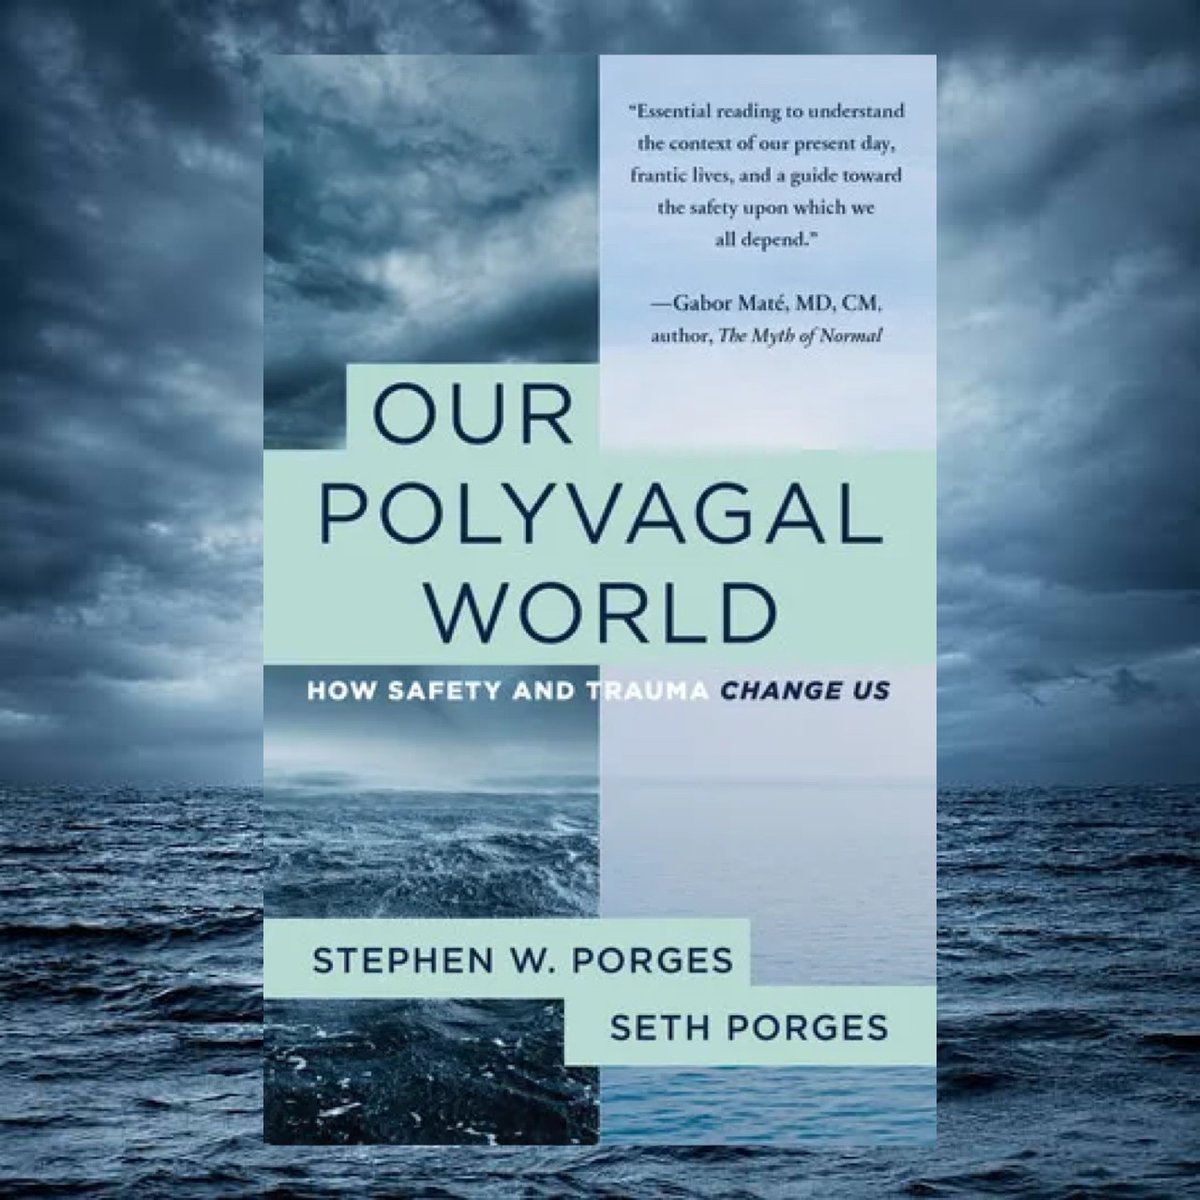 Our Polyvagal World by Stephen W. Porges & Seth Porges

“How safe we feel is crucial to our physical and mental health and happiness.”

#BookReview #Edelweiss #OurPolyvagalWorld #PolyvagalTheory @wwnorton

schizanthusnerd.com/2023/09/26/our…